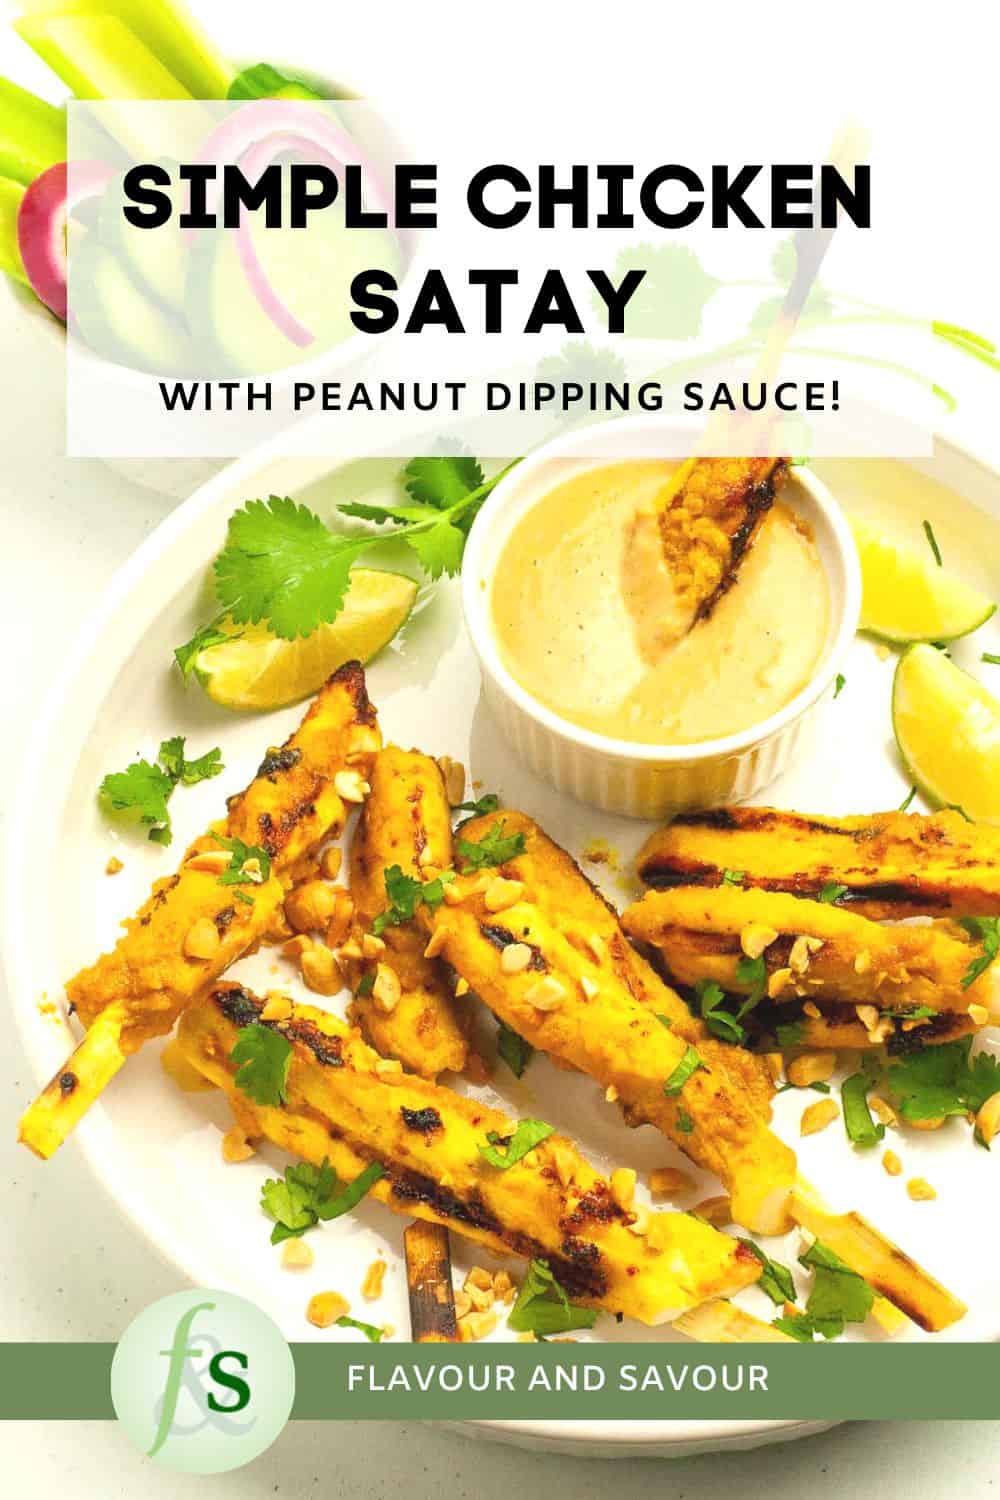 Image with text overlay for chicken satay with peanut sauce.